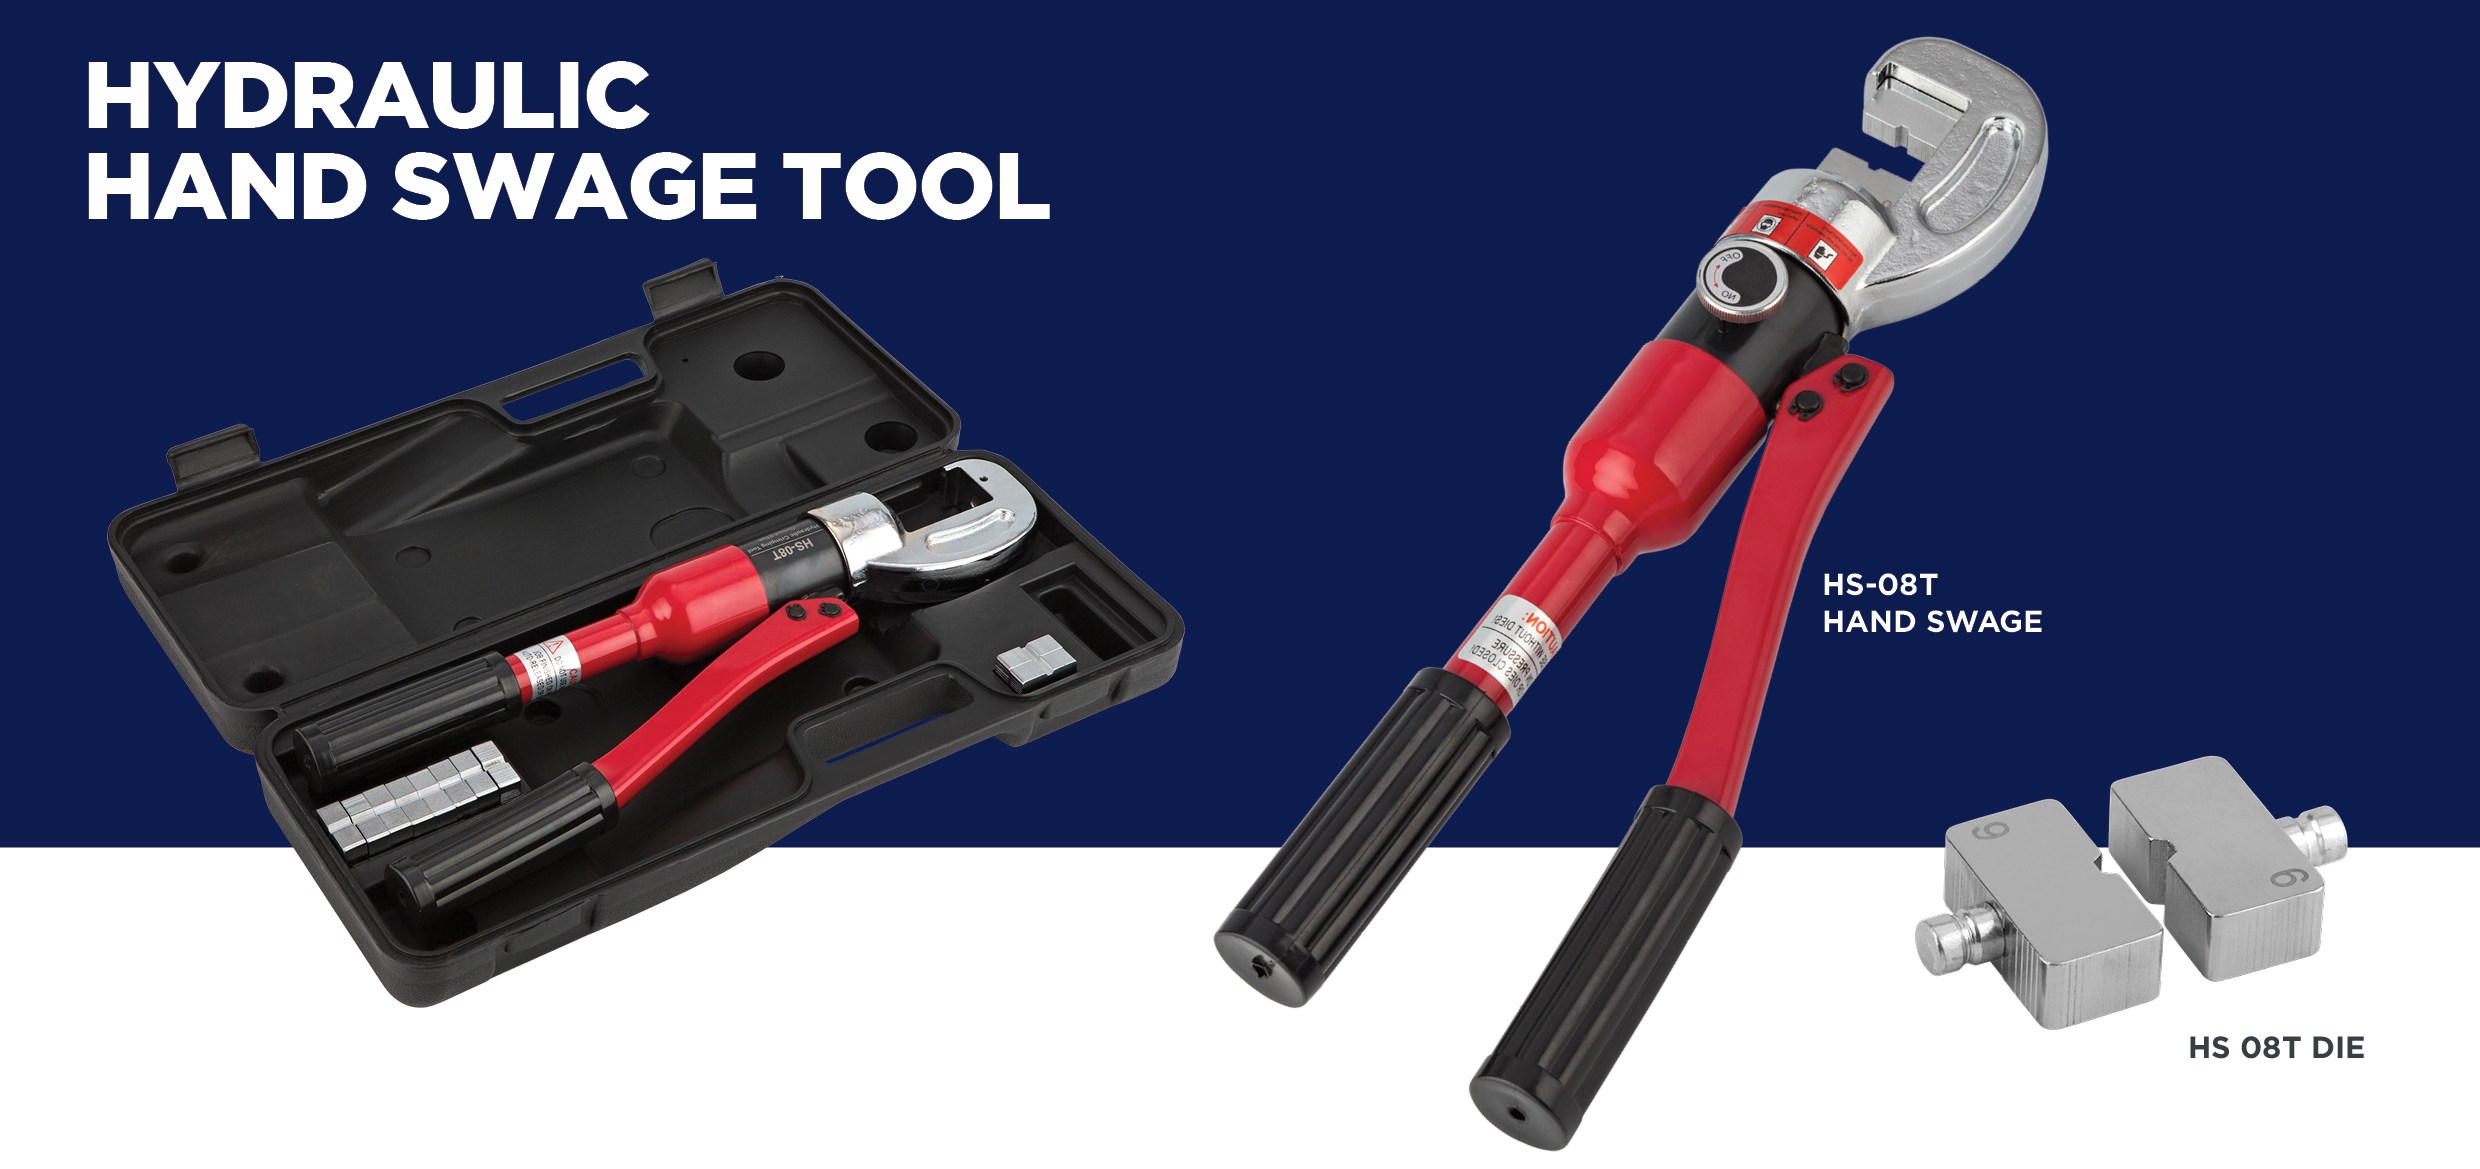 Diy Your Next Project With Our Hydraulic Hand Swage Tool